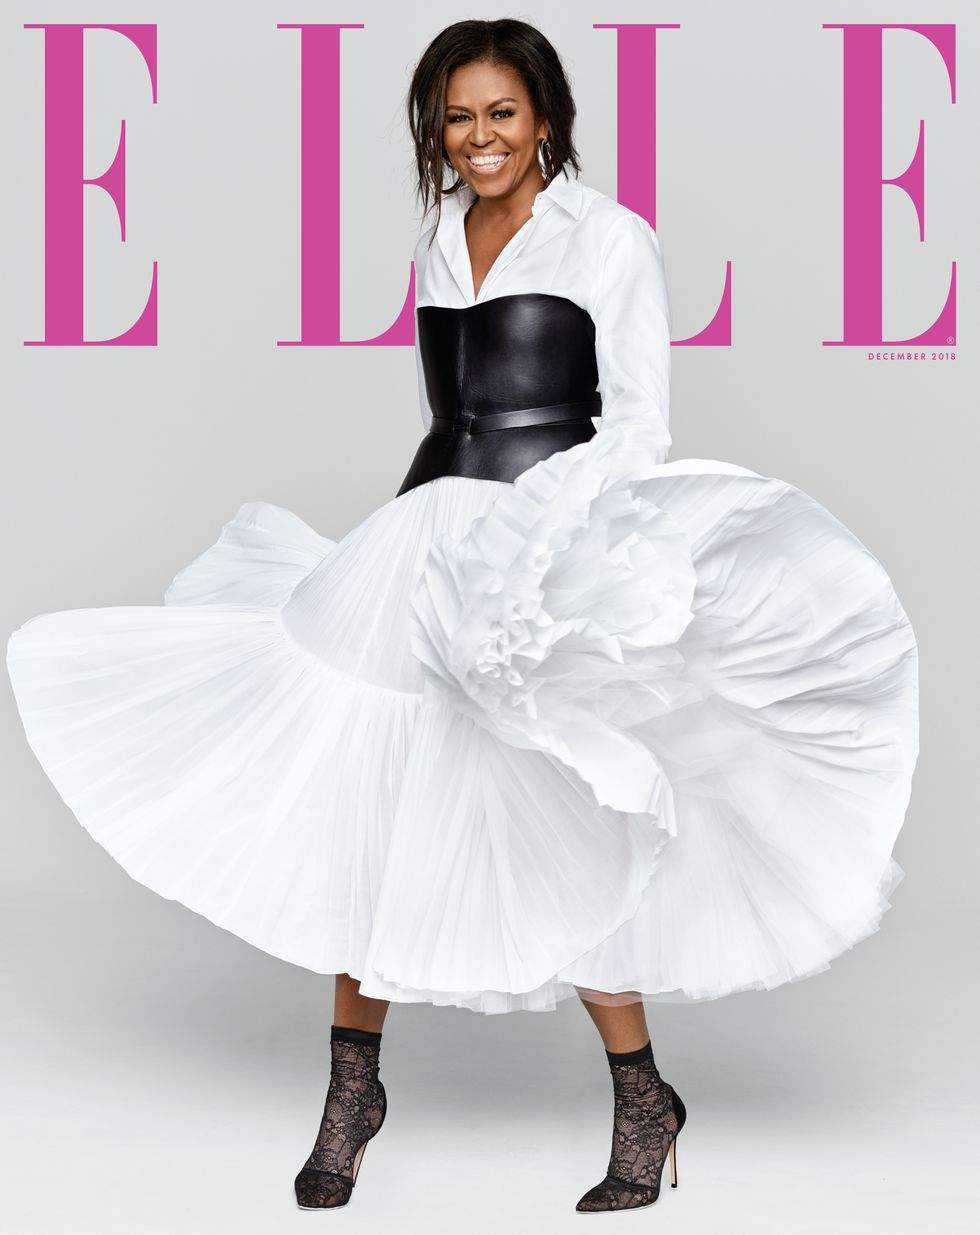 Michelle Obama Glows As She Covers 'Elle's December 2018 Issue (Photos)